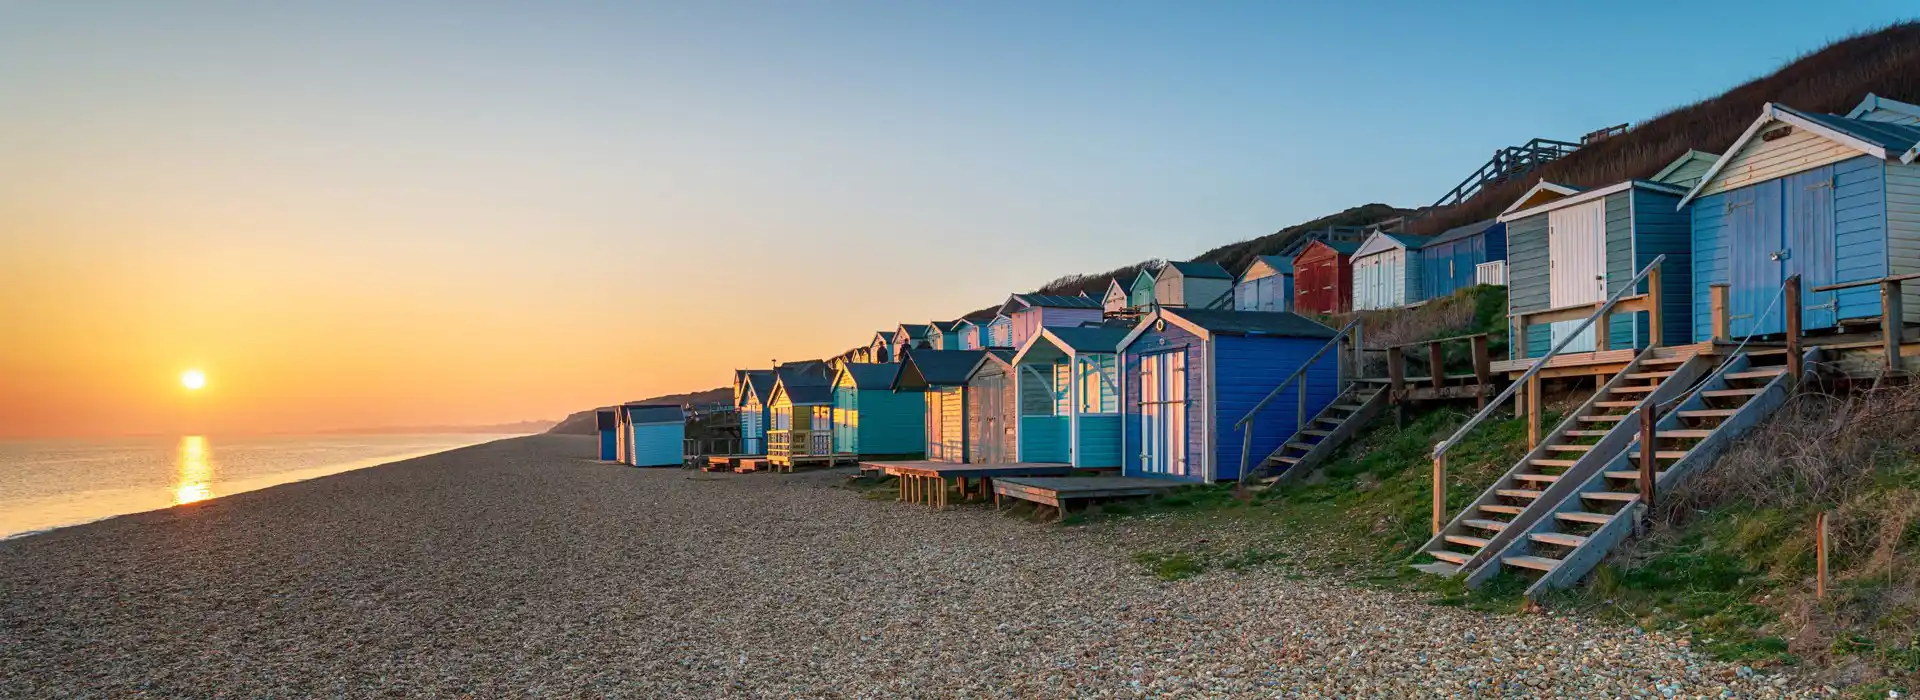 Campsites in Milford on Sea